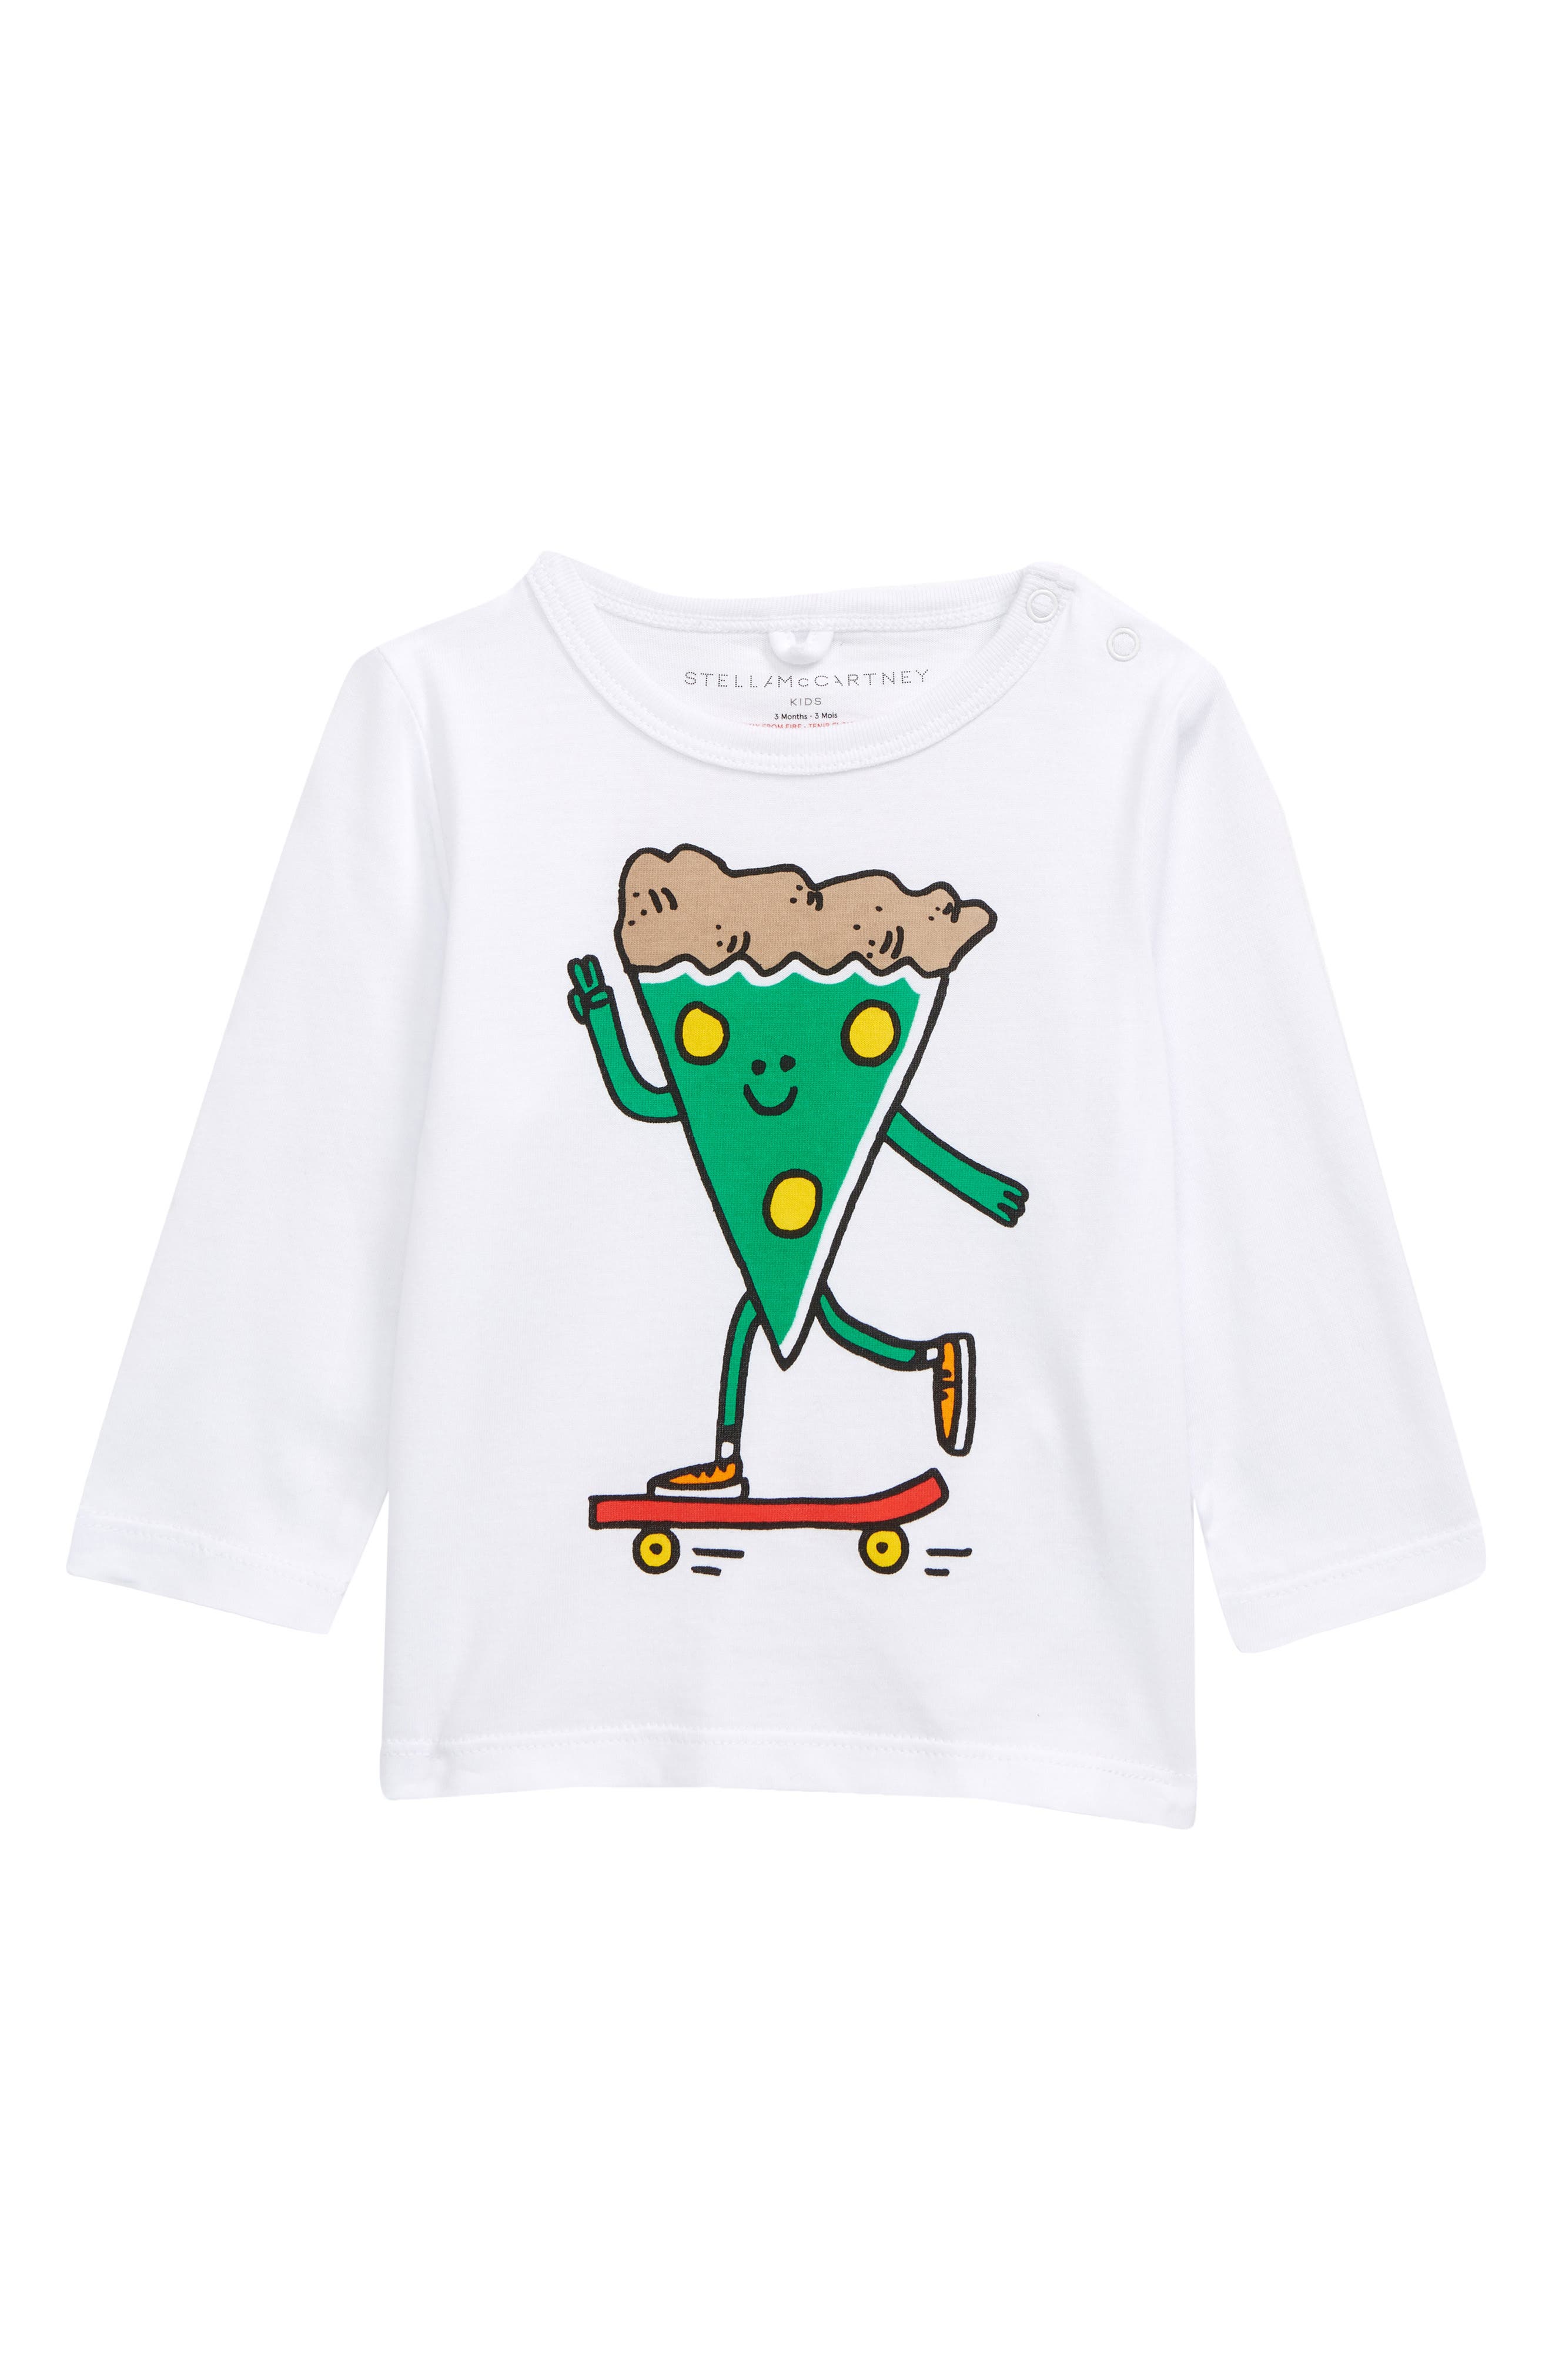 Stella McCartney Pizza Skater Organic Cotton Graphic Tee in White at Nordstrom, Size 12M Us